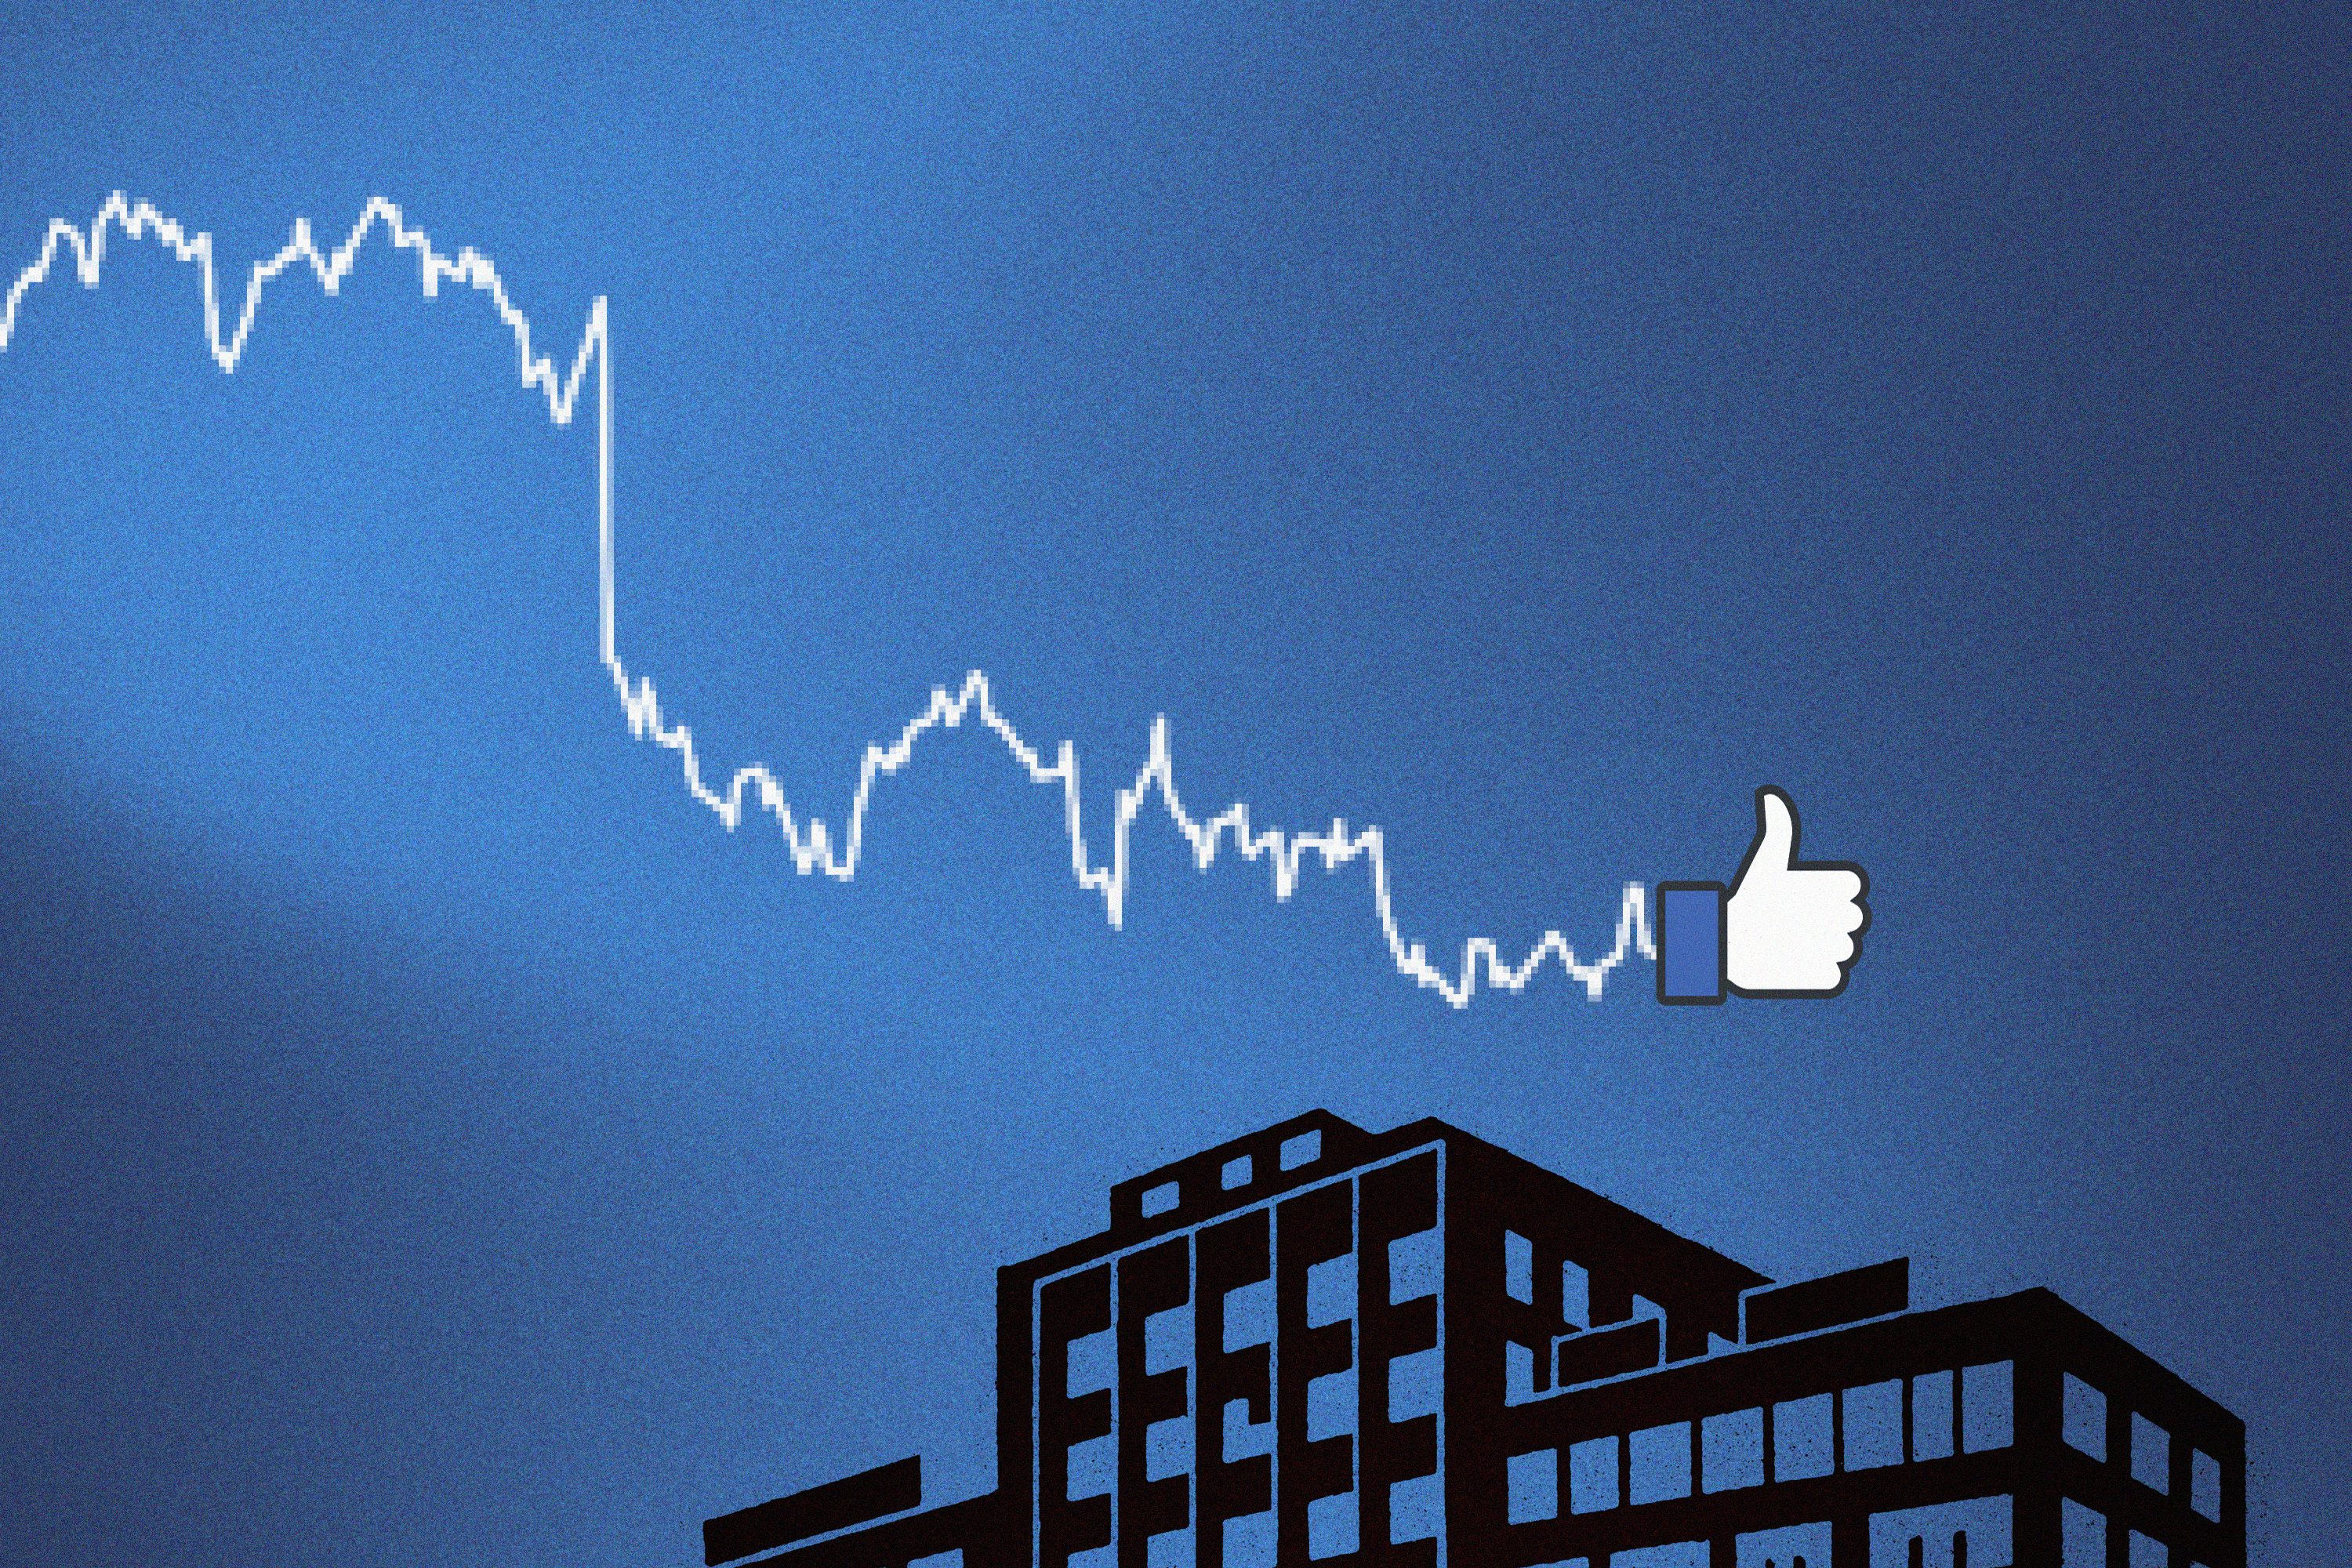 Illustration of a jagged downward-trending graph line with a Facebook thumbs-up logo at the bottom end of it.